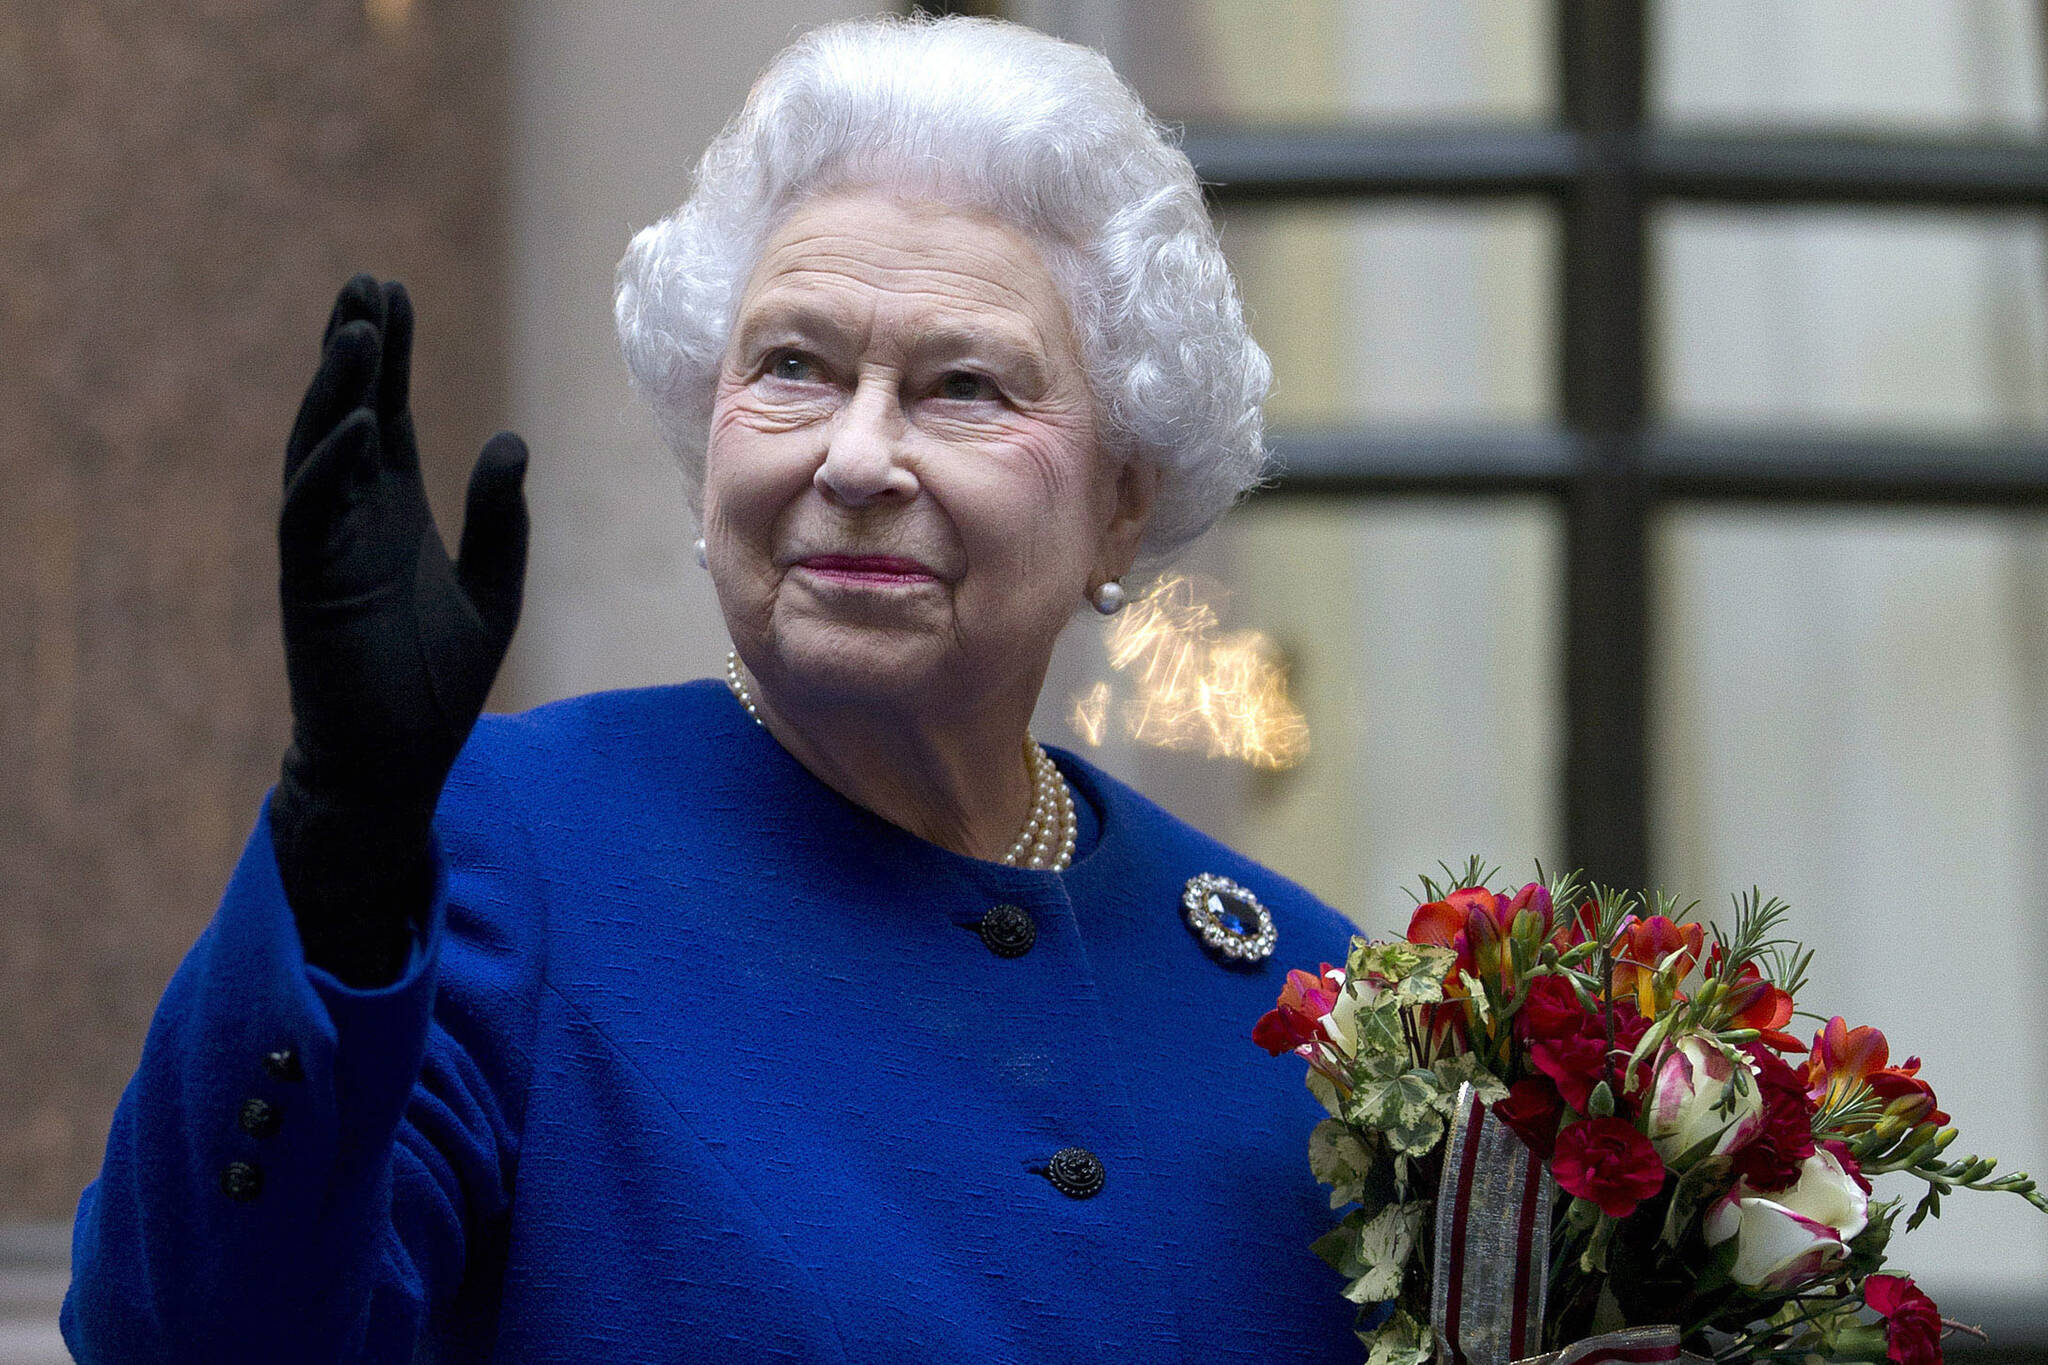 In this Tuesday, Dec. 18, 2012 file photo, Britain's Queen Elizabeth II looks up and waves to members of staff of The Foreign and Commonwealth Office as she ends an official visit which is part of her Jubilee celebrations in London. Queen Elizabeth II, Britain’s longest-reigning monarch and a symbol of stability across much of a turbulent century, has died on Thursday, Sept, 8, 2022. She was 96. (AP Photo / Alastair Grant Pool)